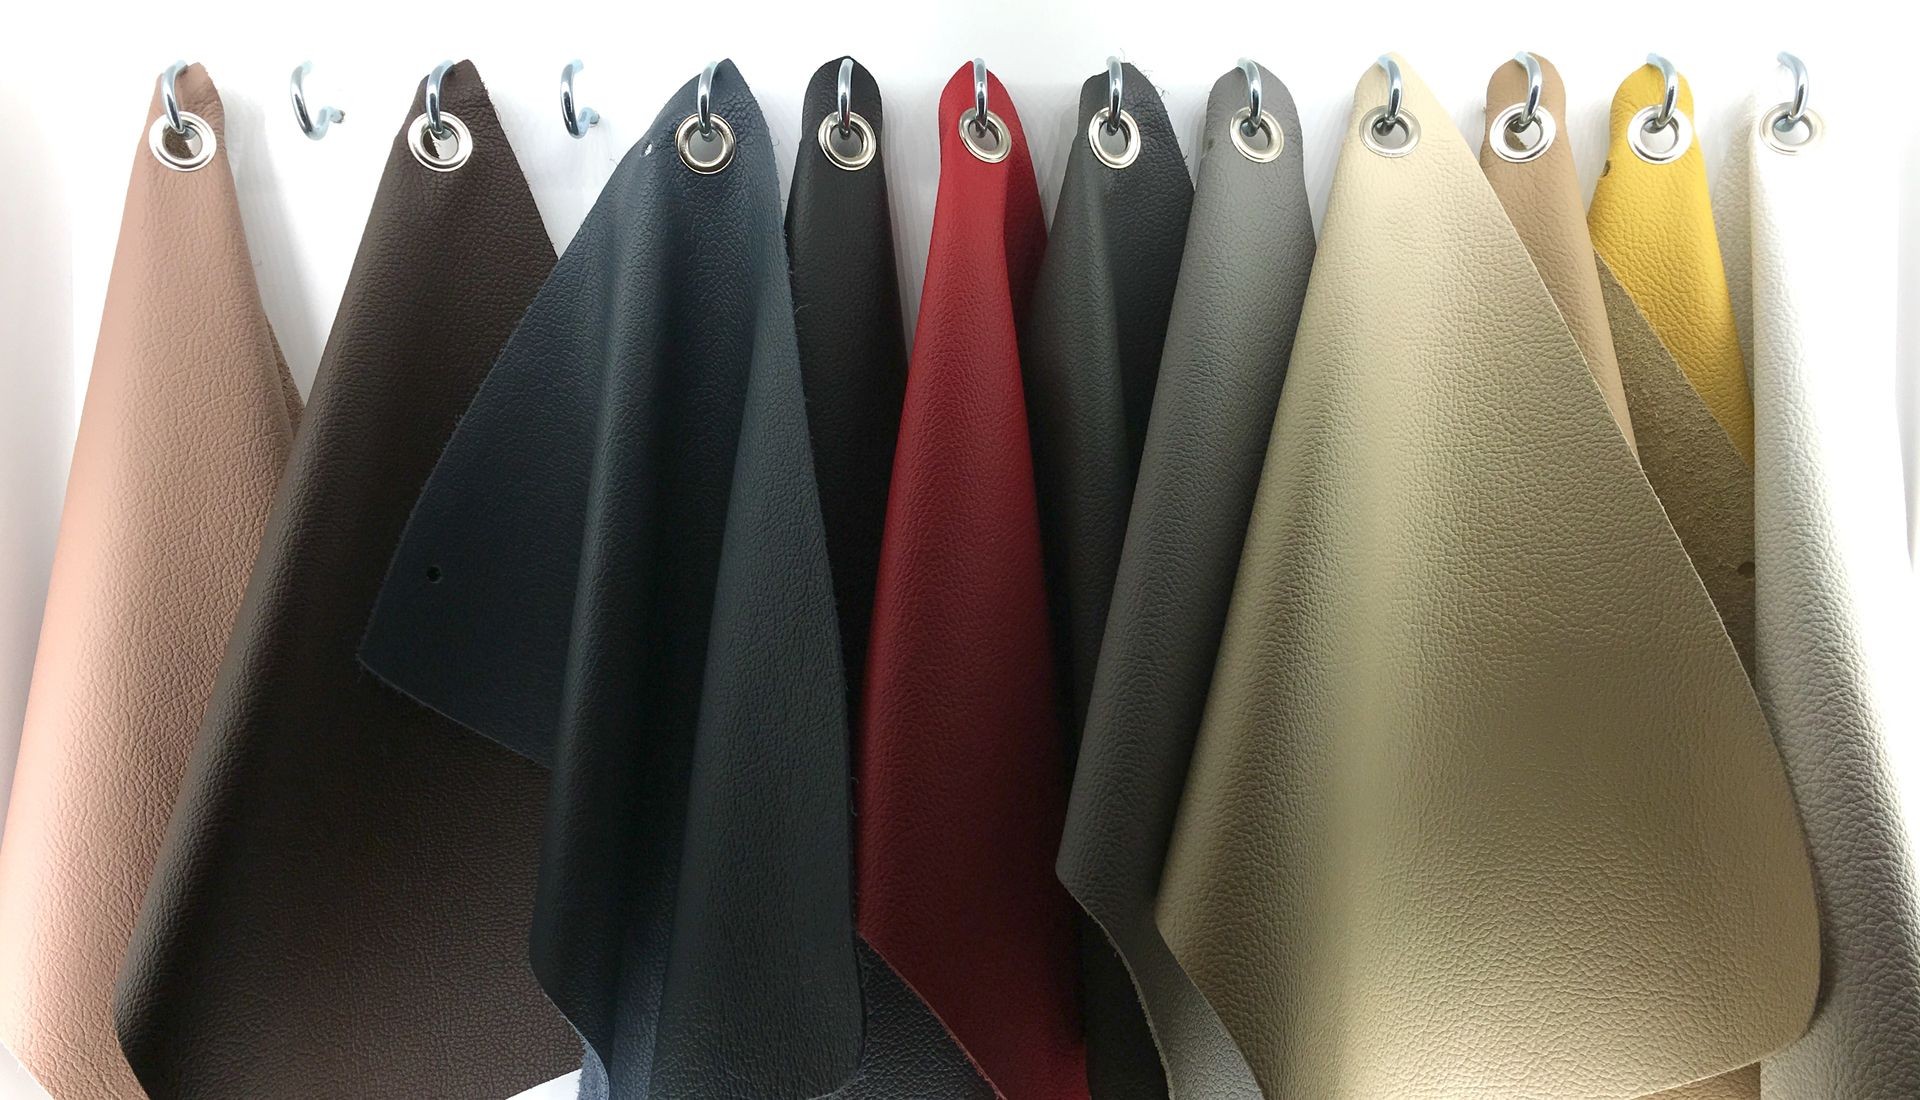 Leather colour and texture fabric swatches hanging on hooks. 